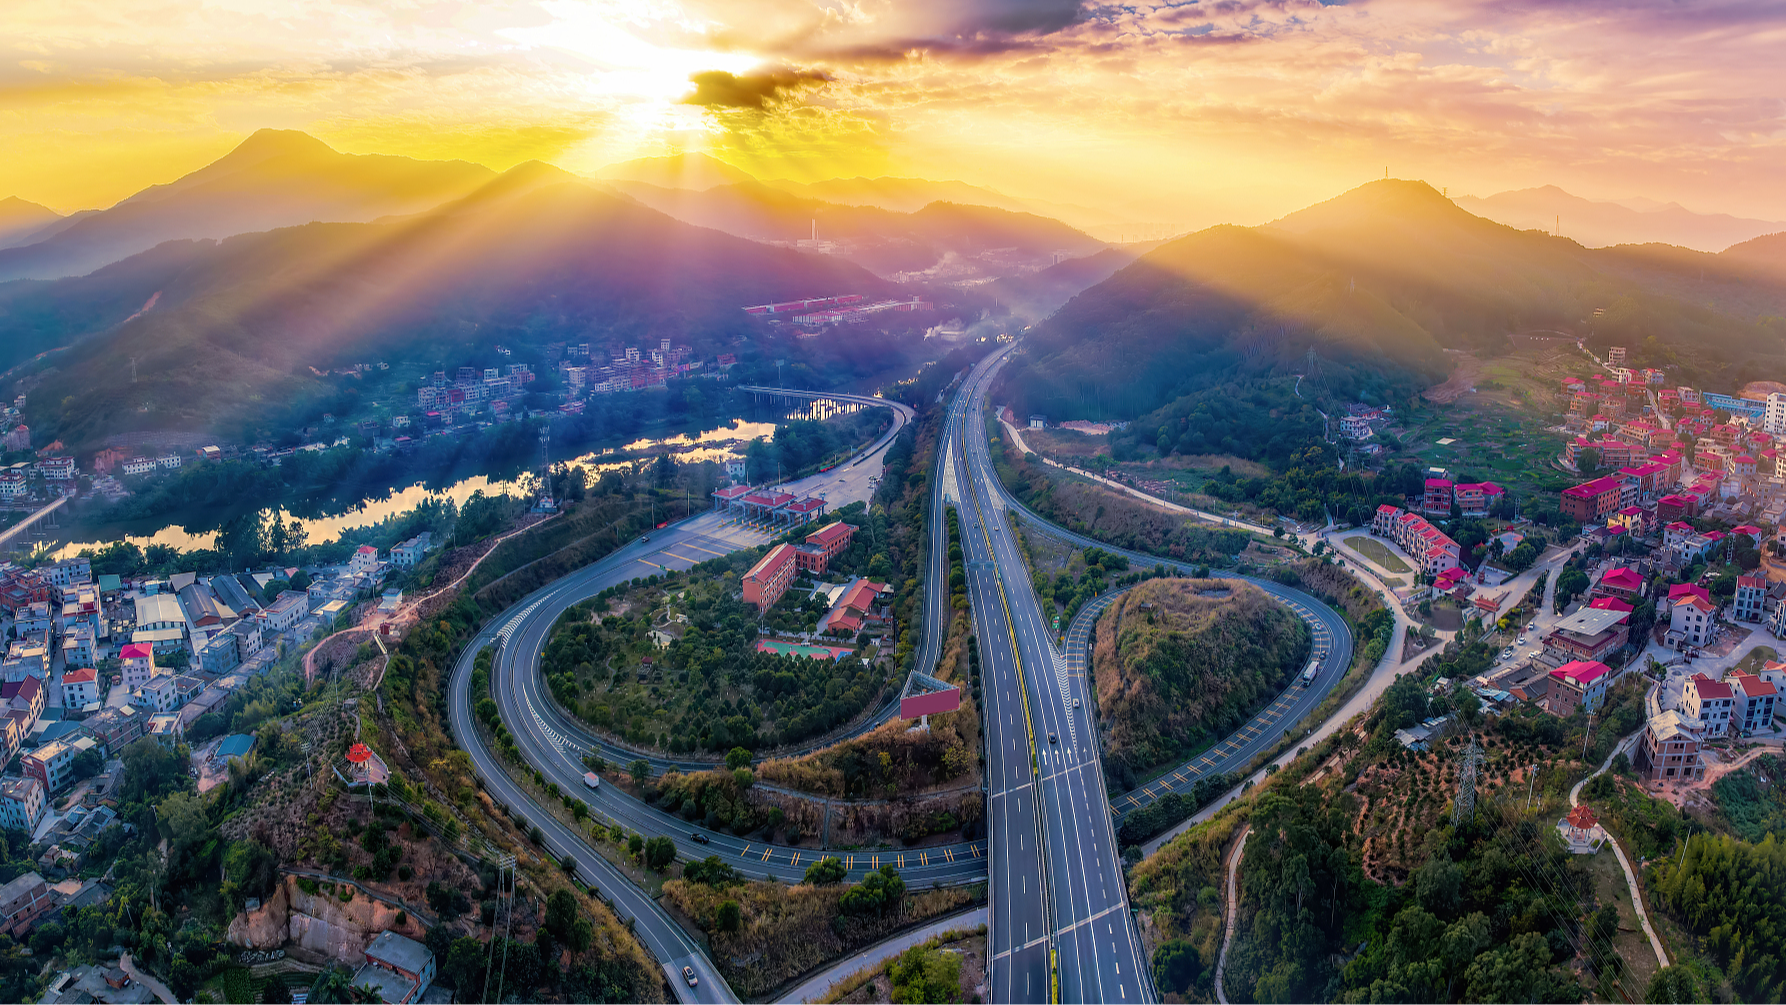 The mesmerizing sight of winding highways against the backdrop of the sunset's afterglow, Quanzhou City, southeast China's Fujian Province, December 20, 2021. /CFP